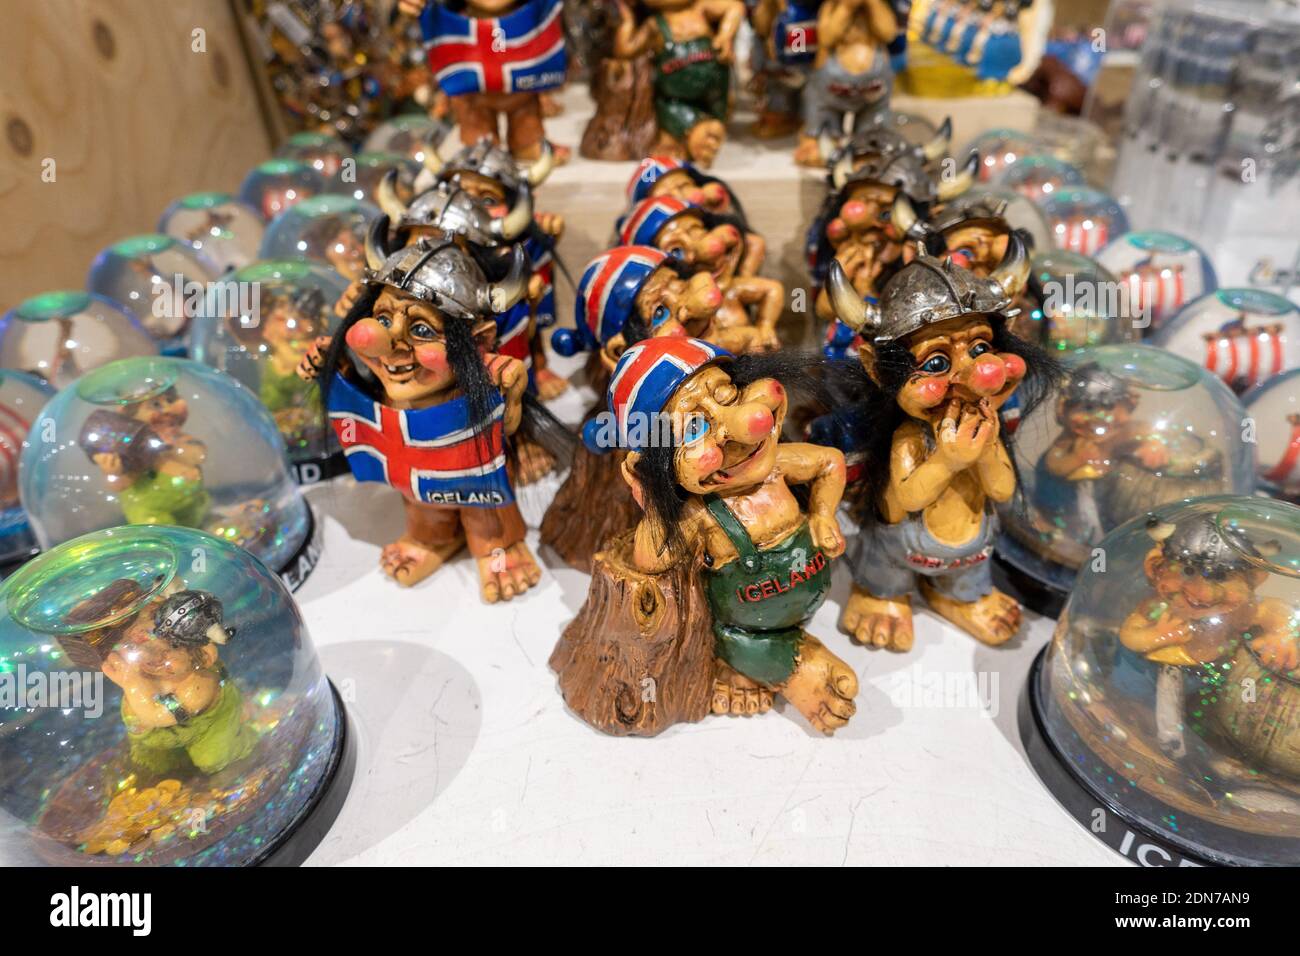 Souvenir Icelandic Trolls Tourist Souvenirs For Sale In A Gift Store Iceland Stock Photo